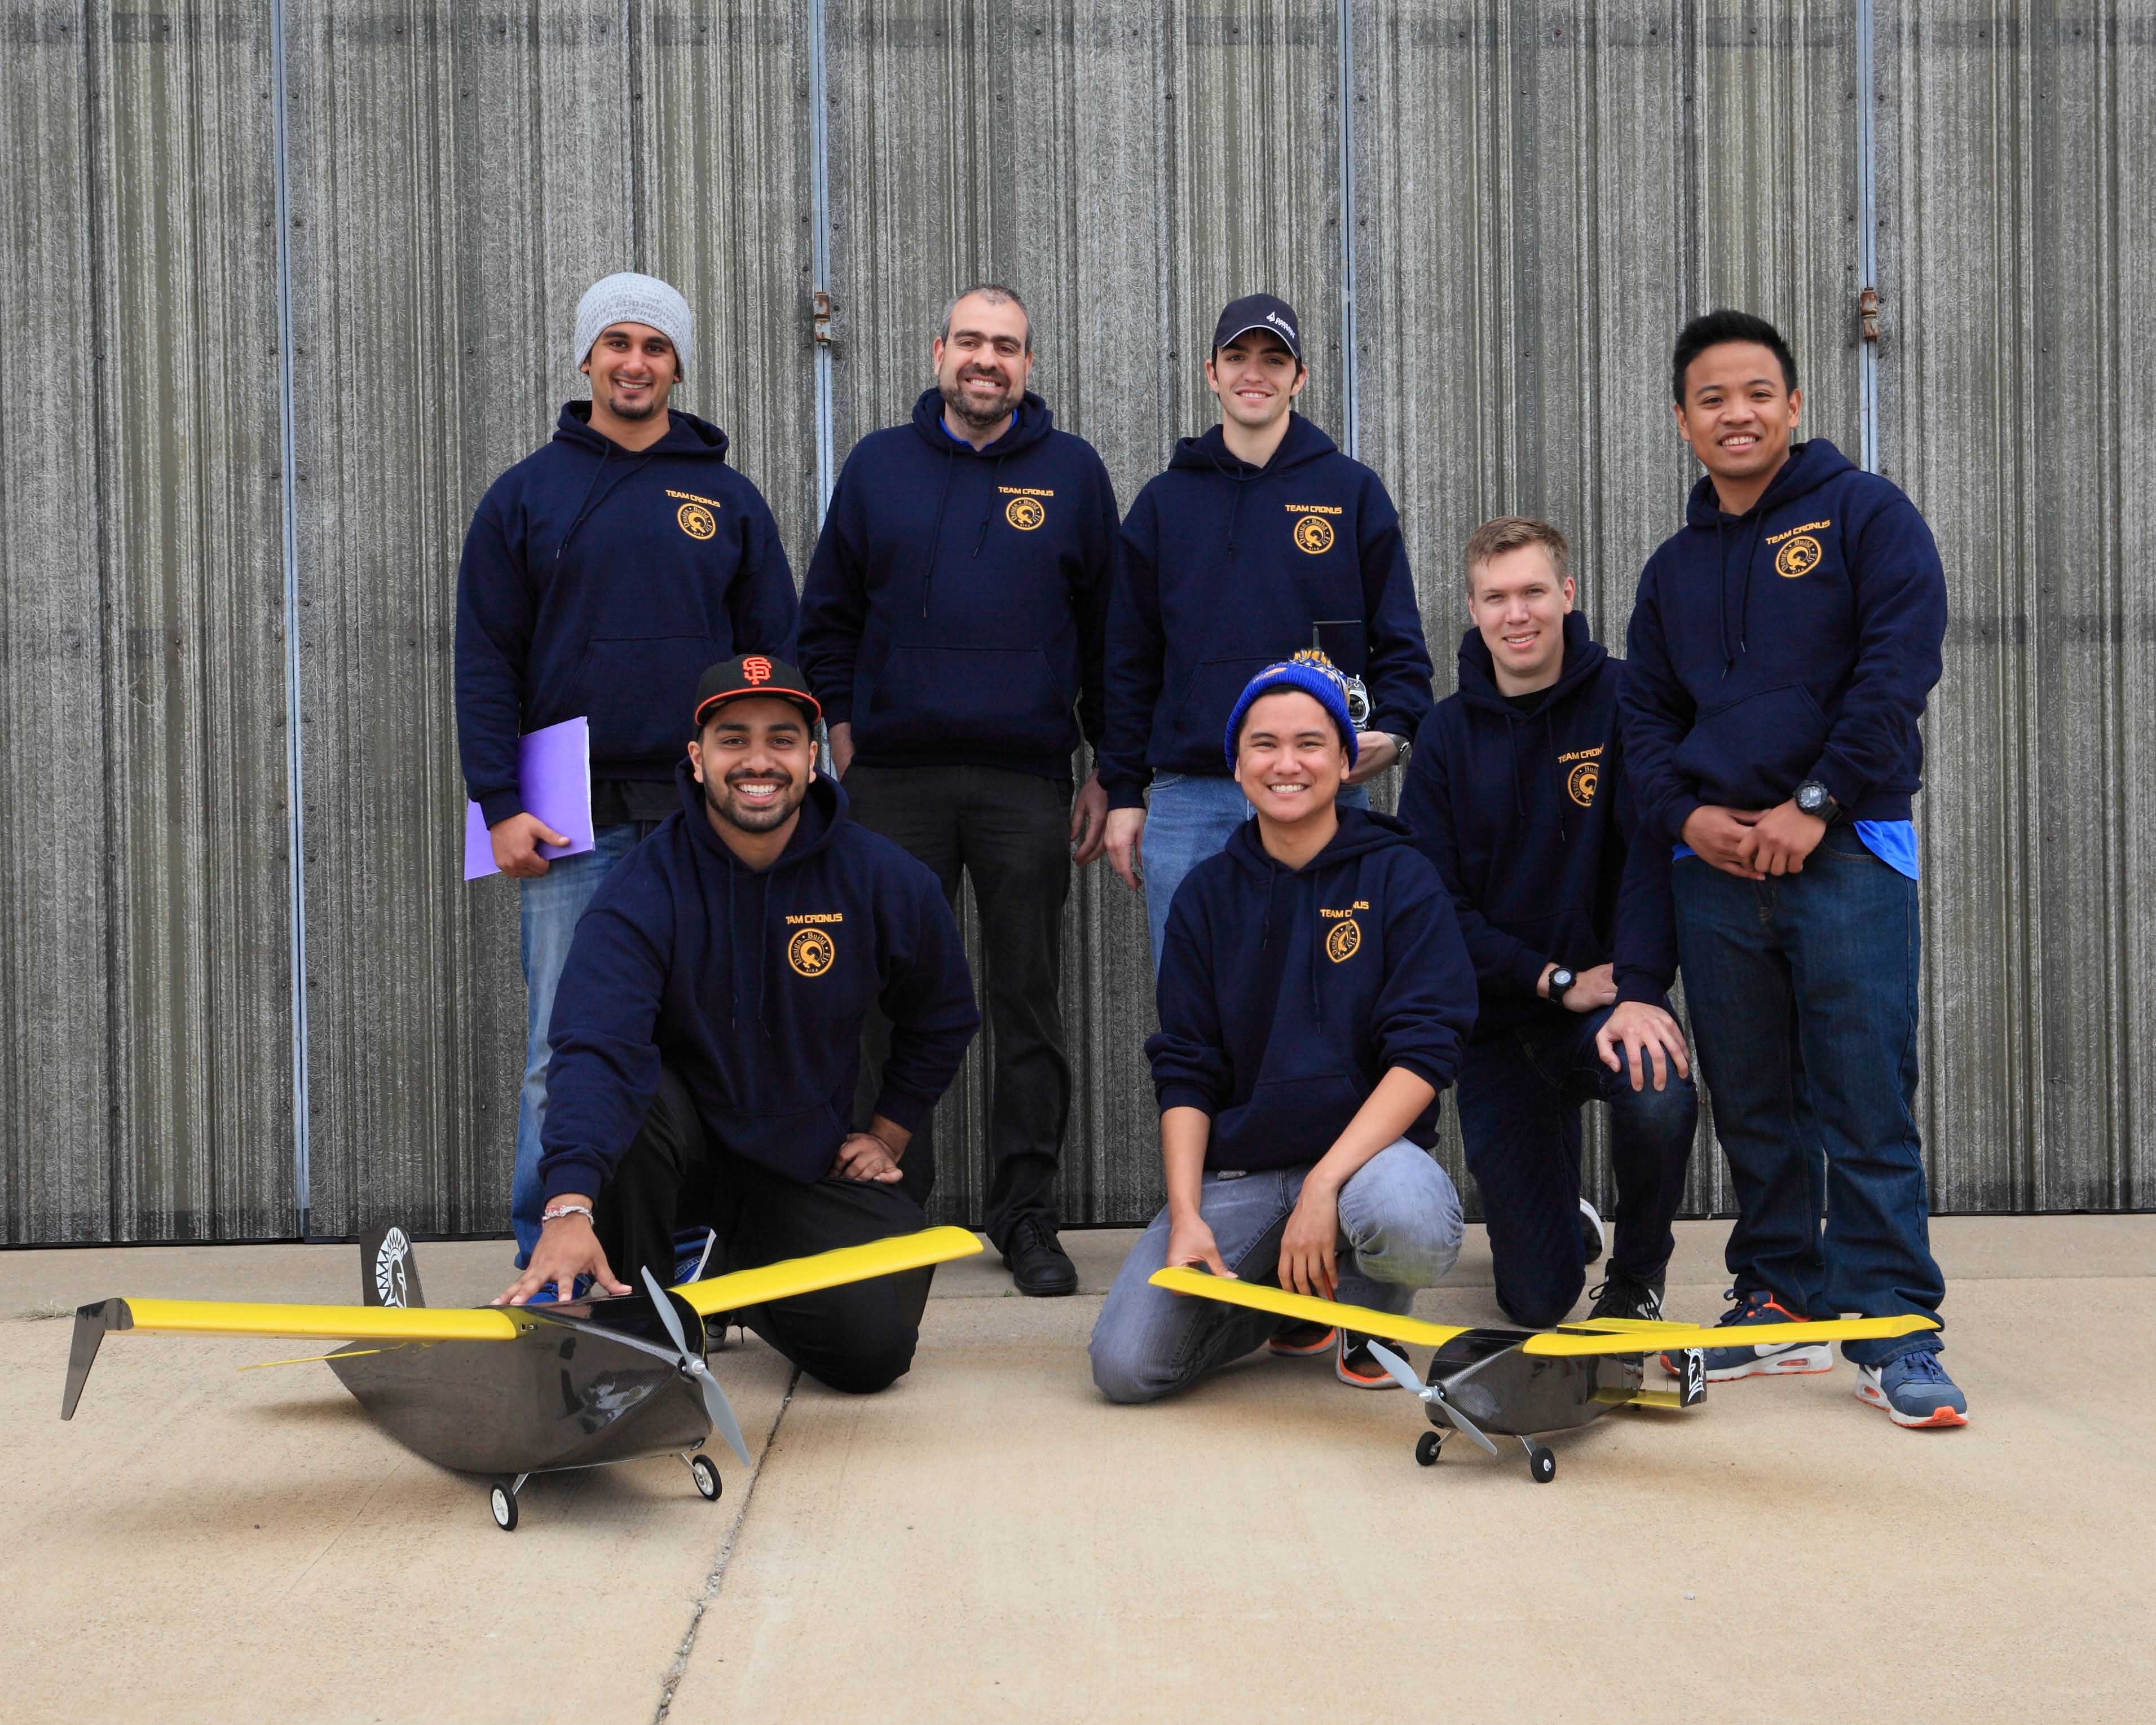 Aircraft Design Students Win 1st Place in the AIAA Design-Build 